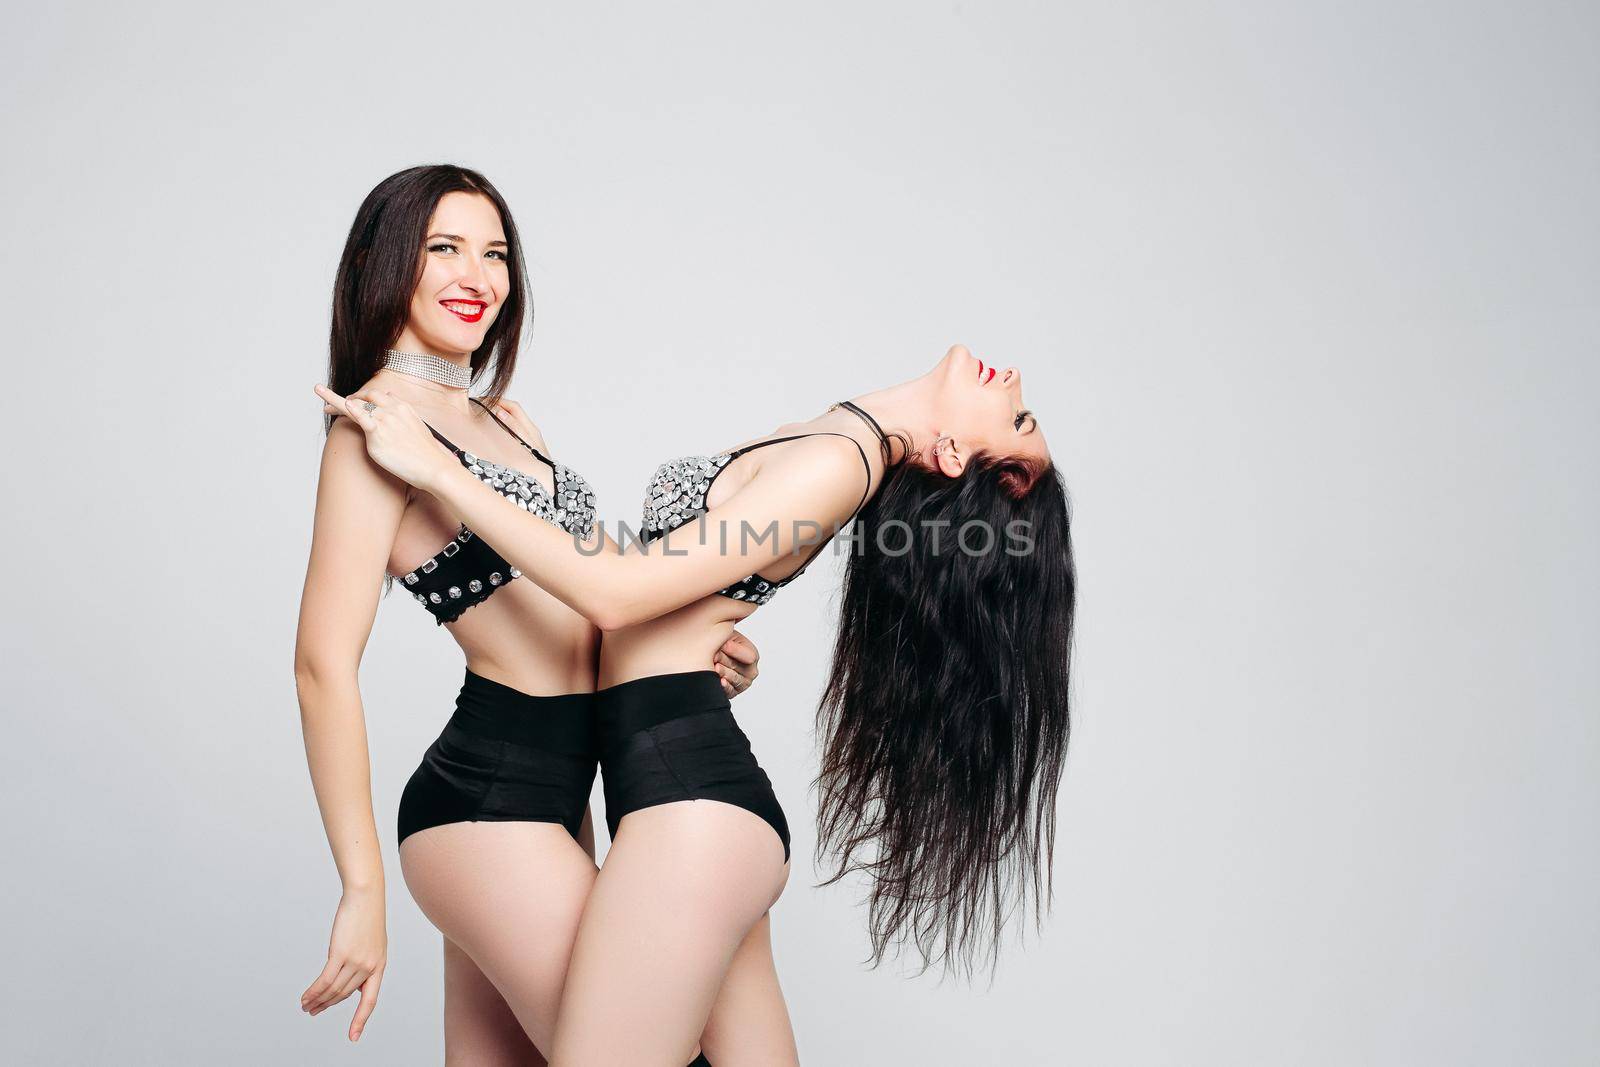 Studio portrait of two happy seductive girls with long black hair wearing sexy dancing costumes hugging over white background.